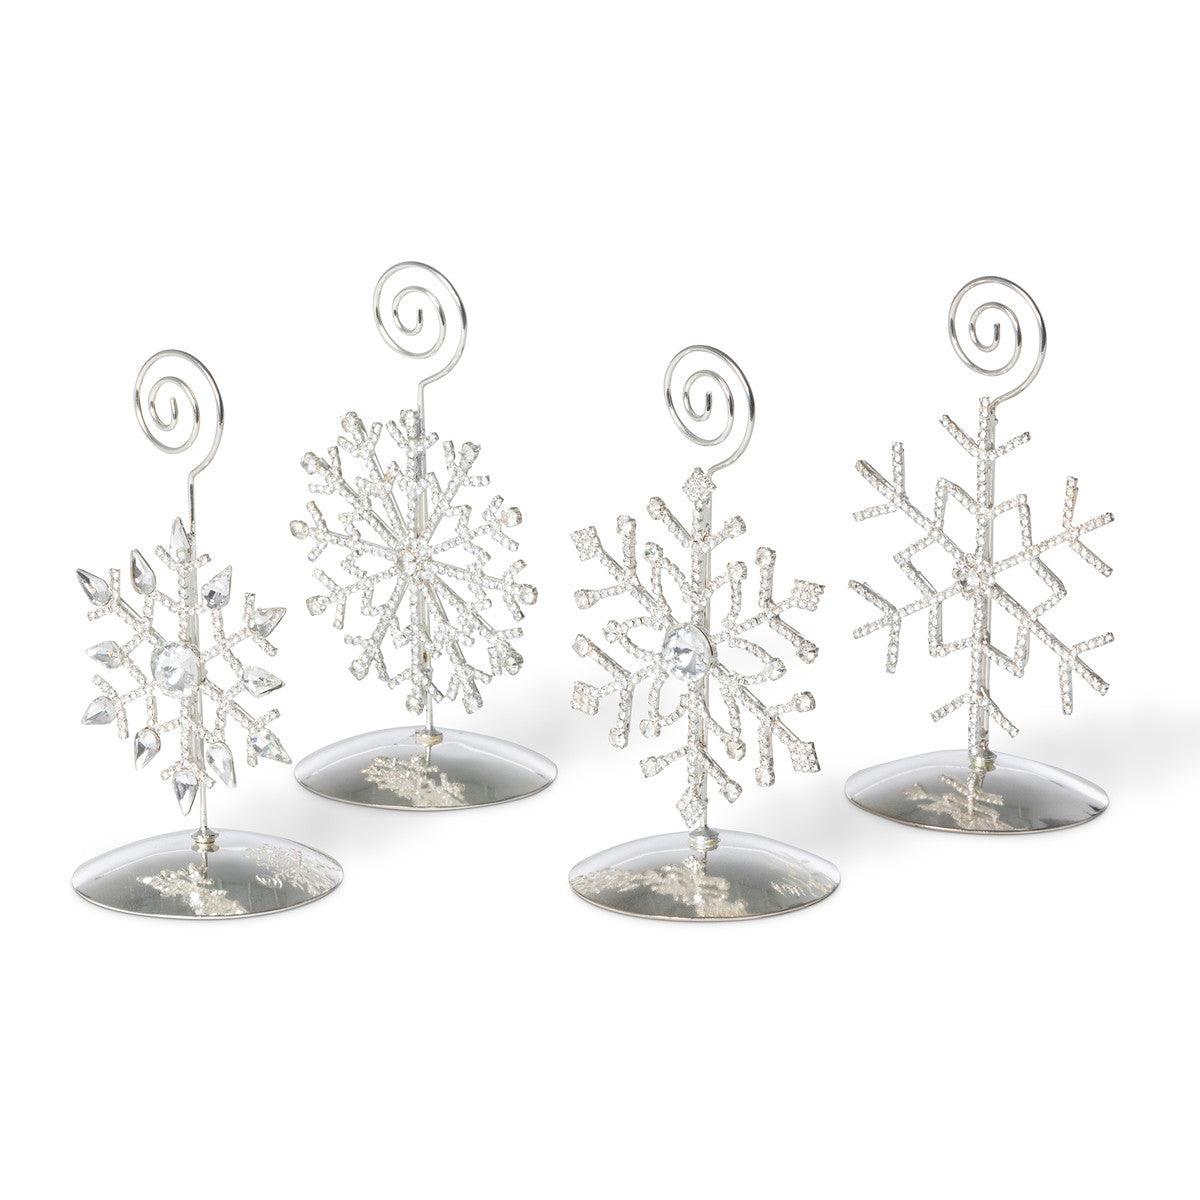 Snowflake Splendor Place Card Holders - Signastyle Boutique